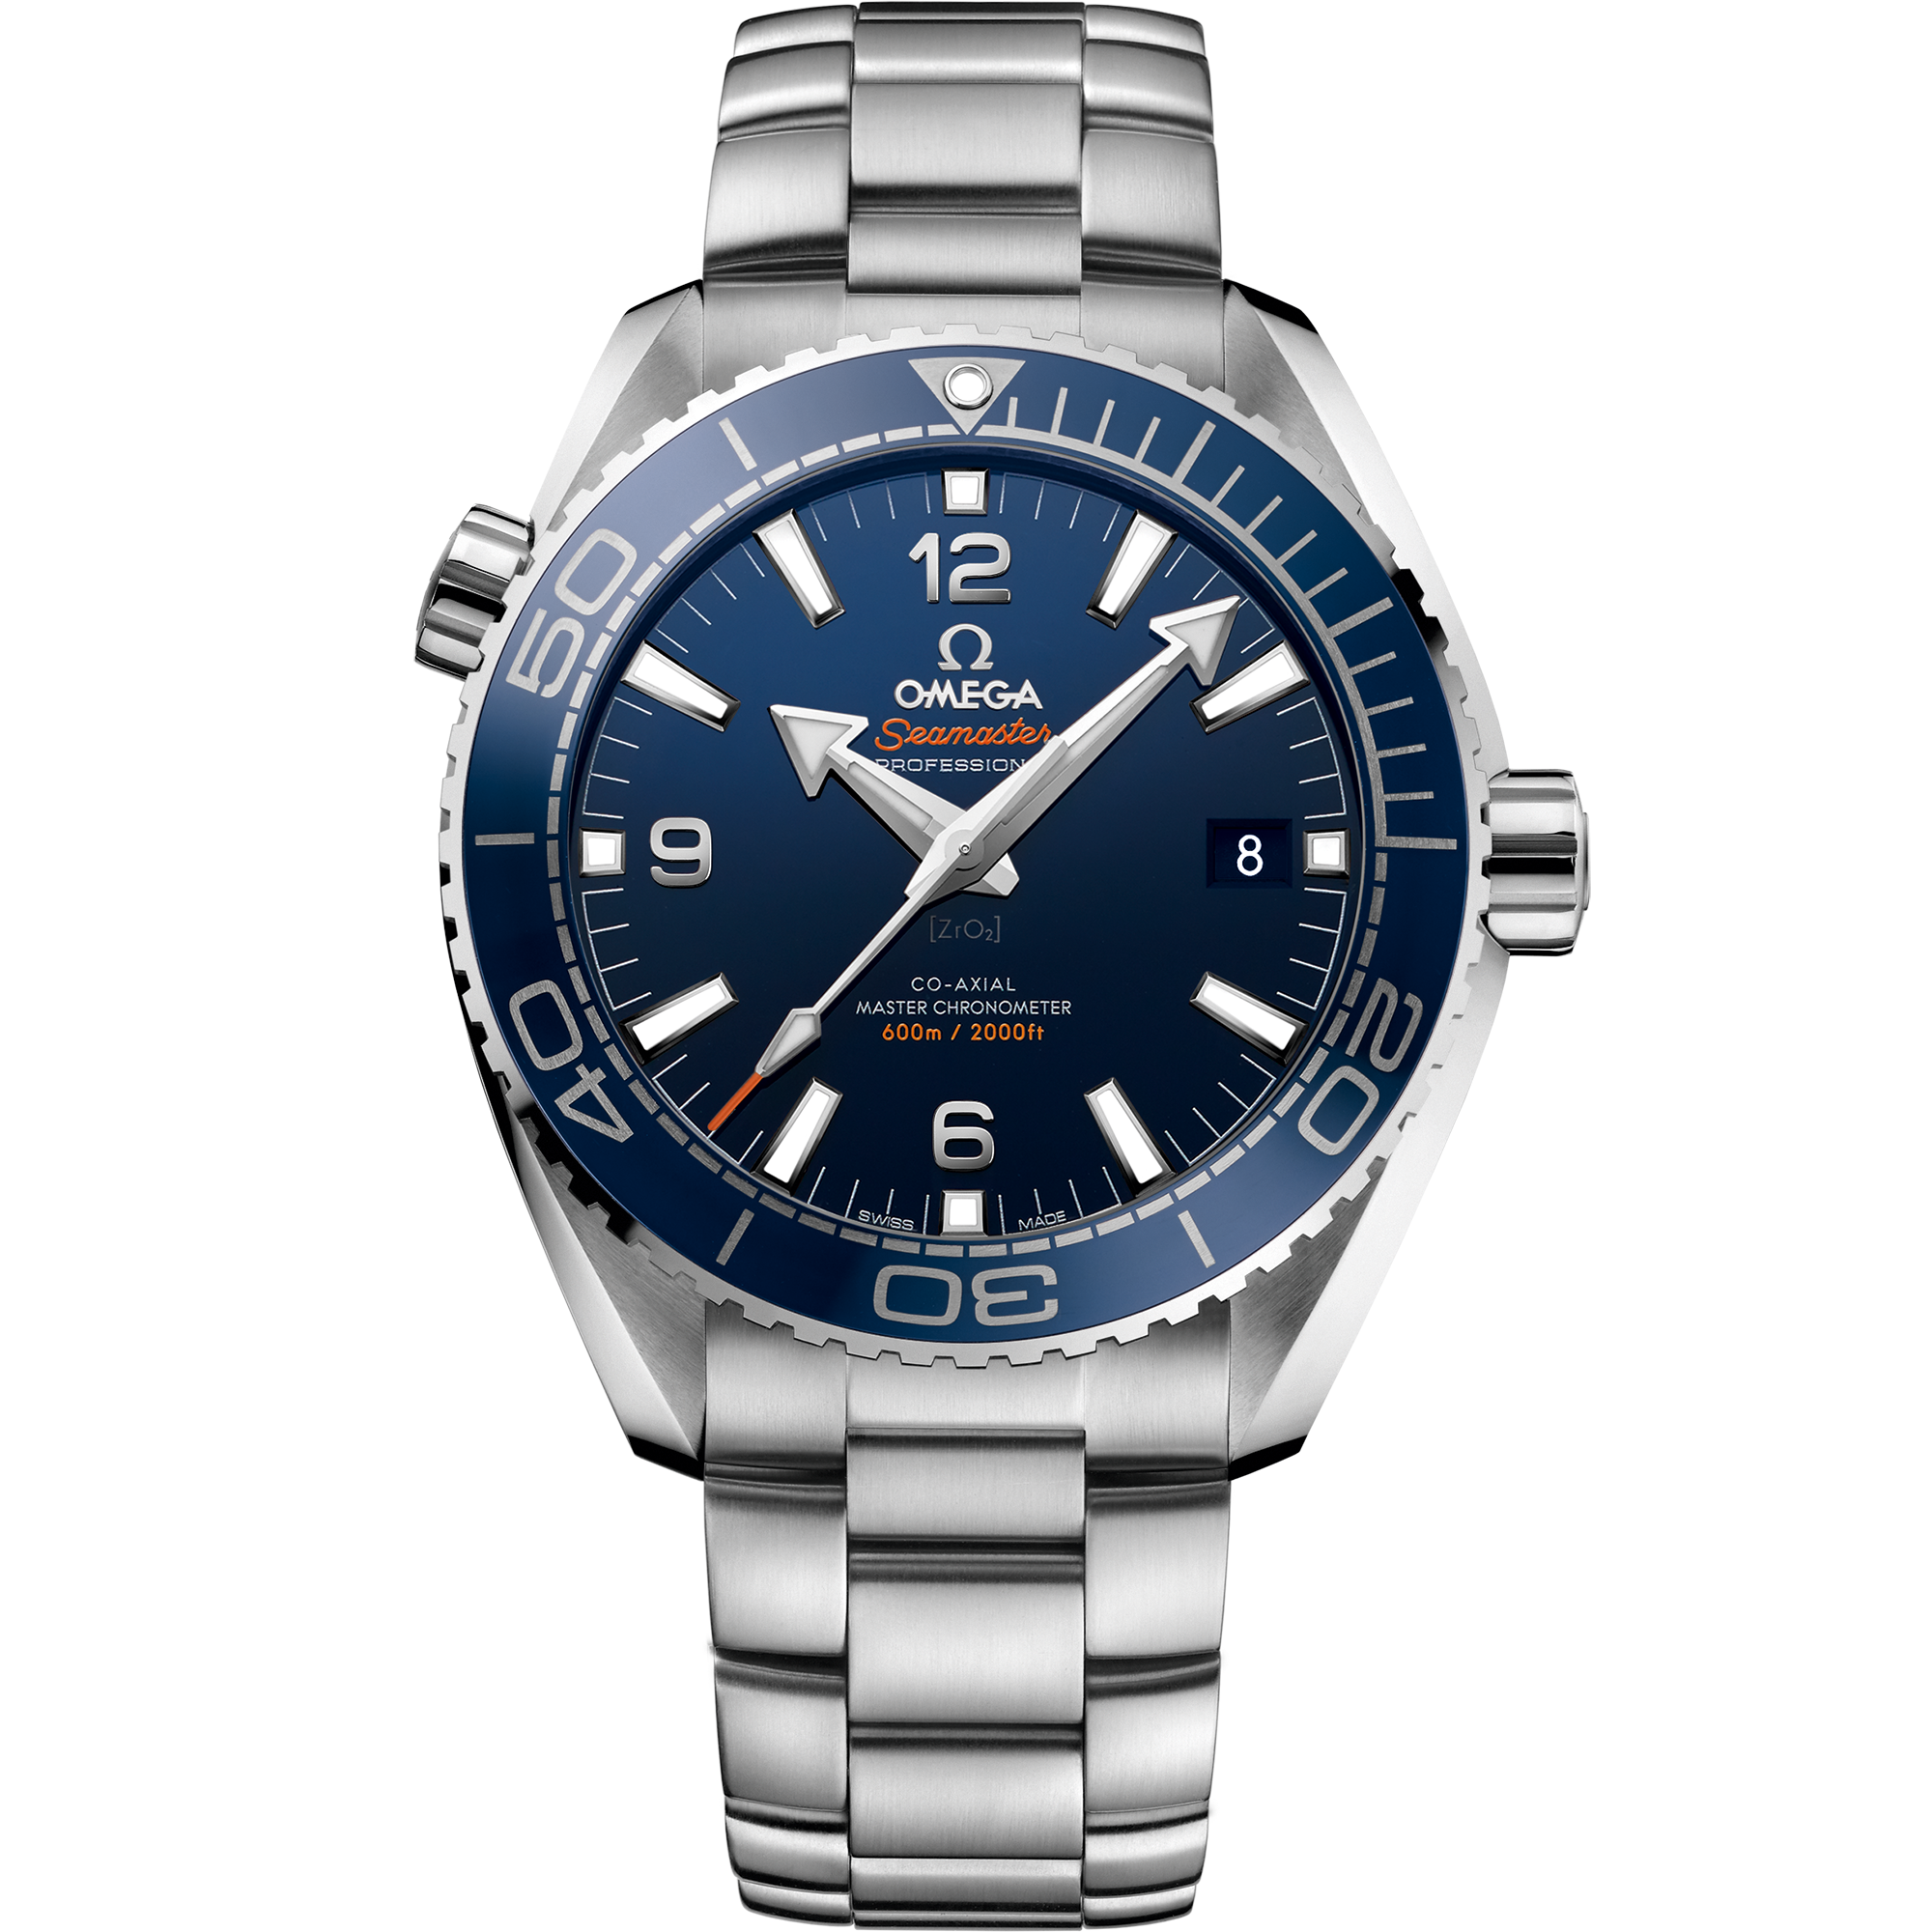 Seamaster Main Collection Watches | OMEGA US®